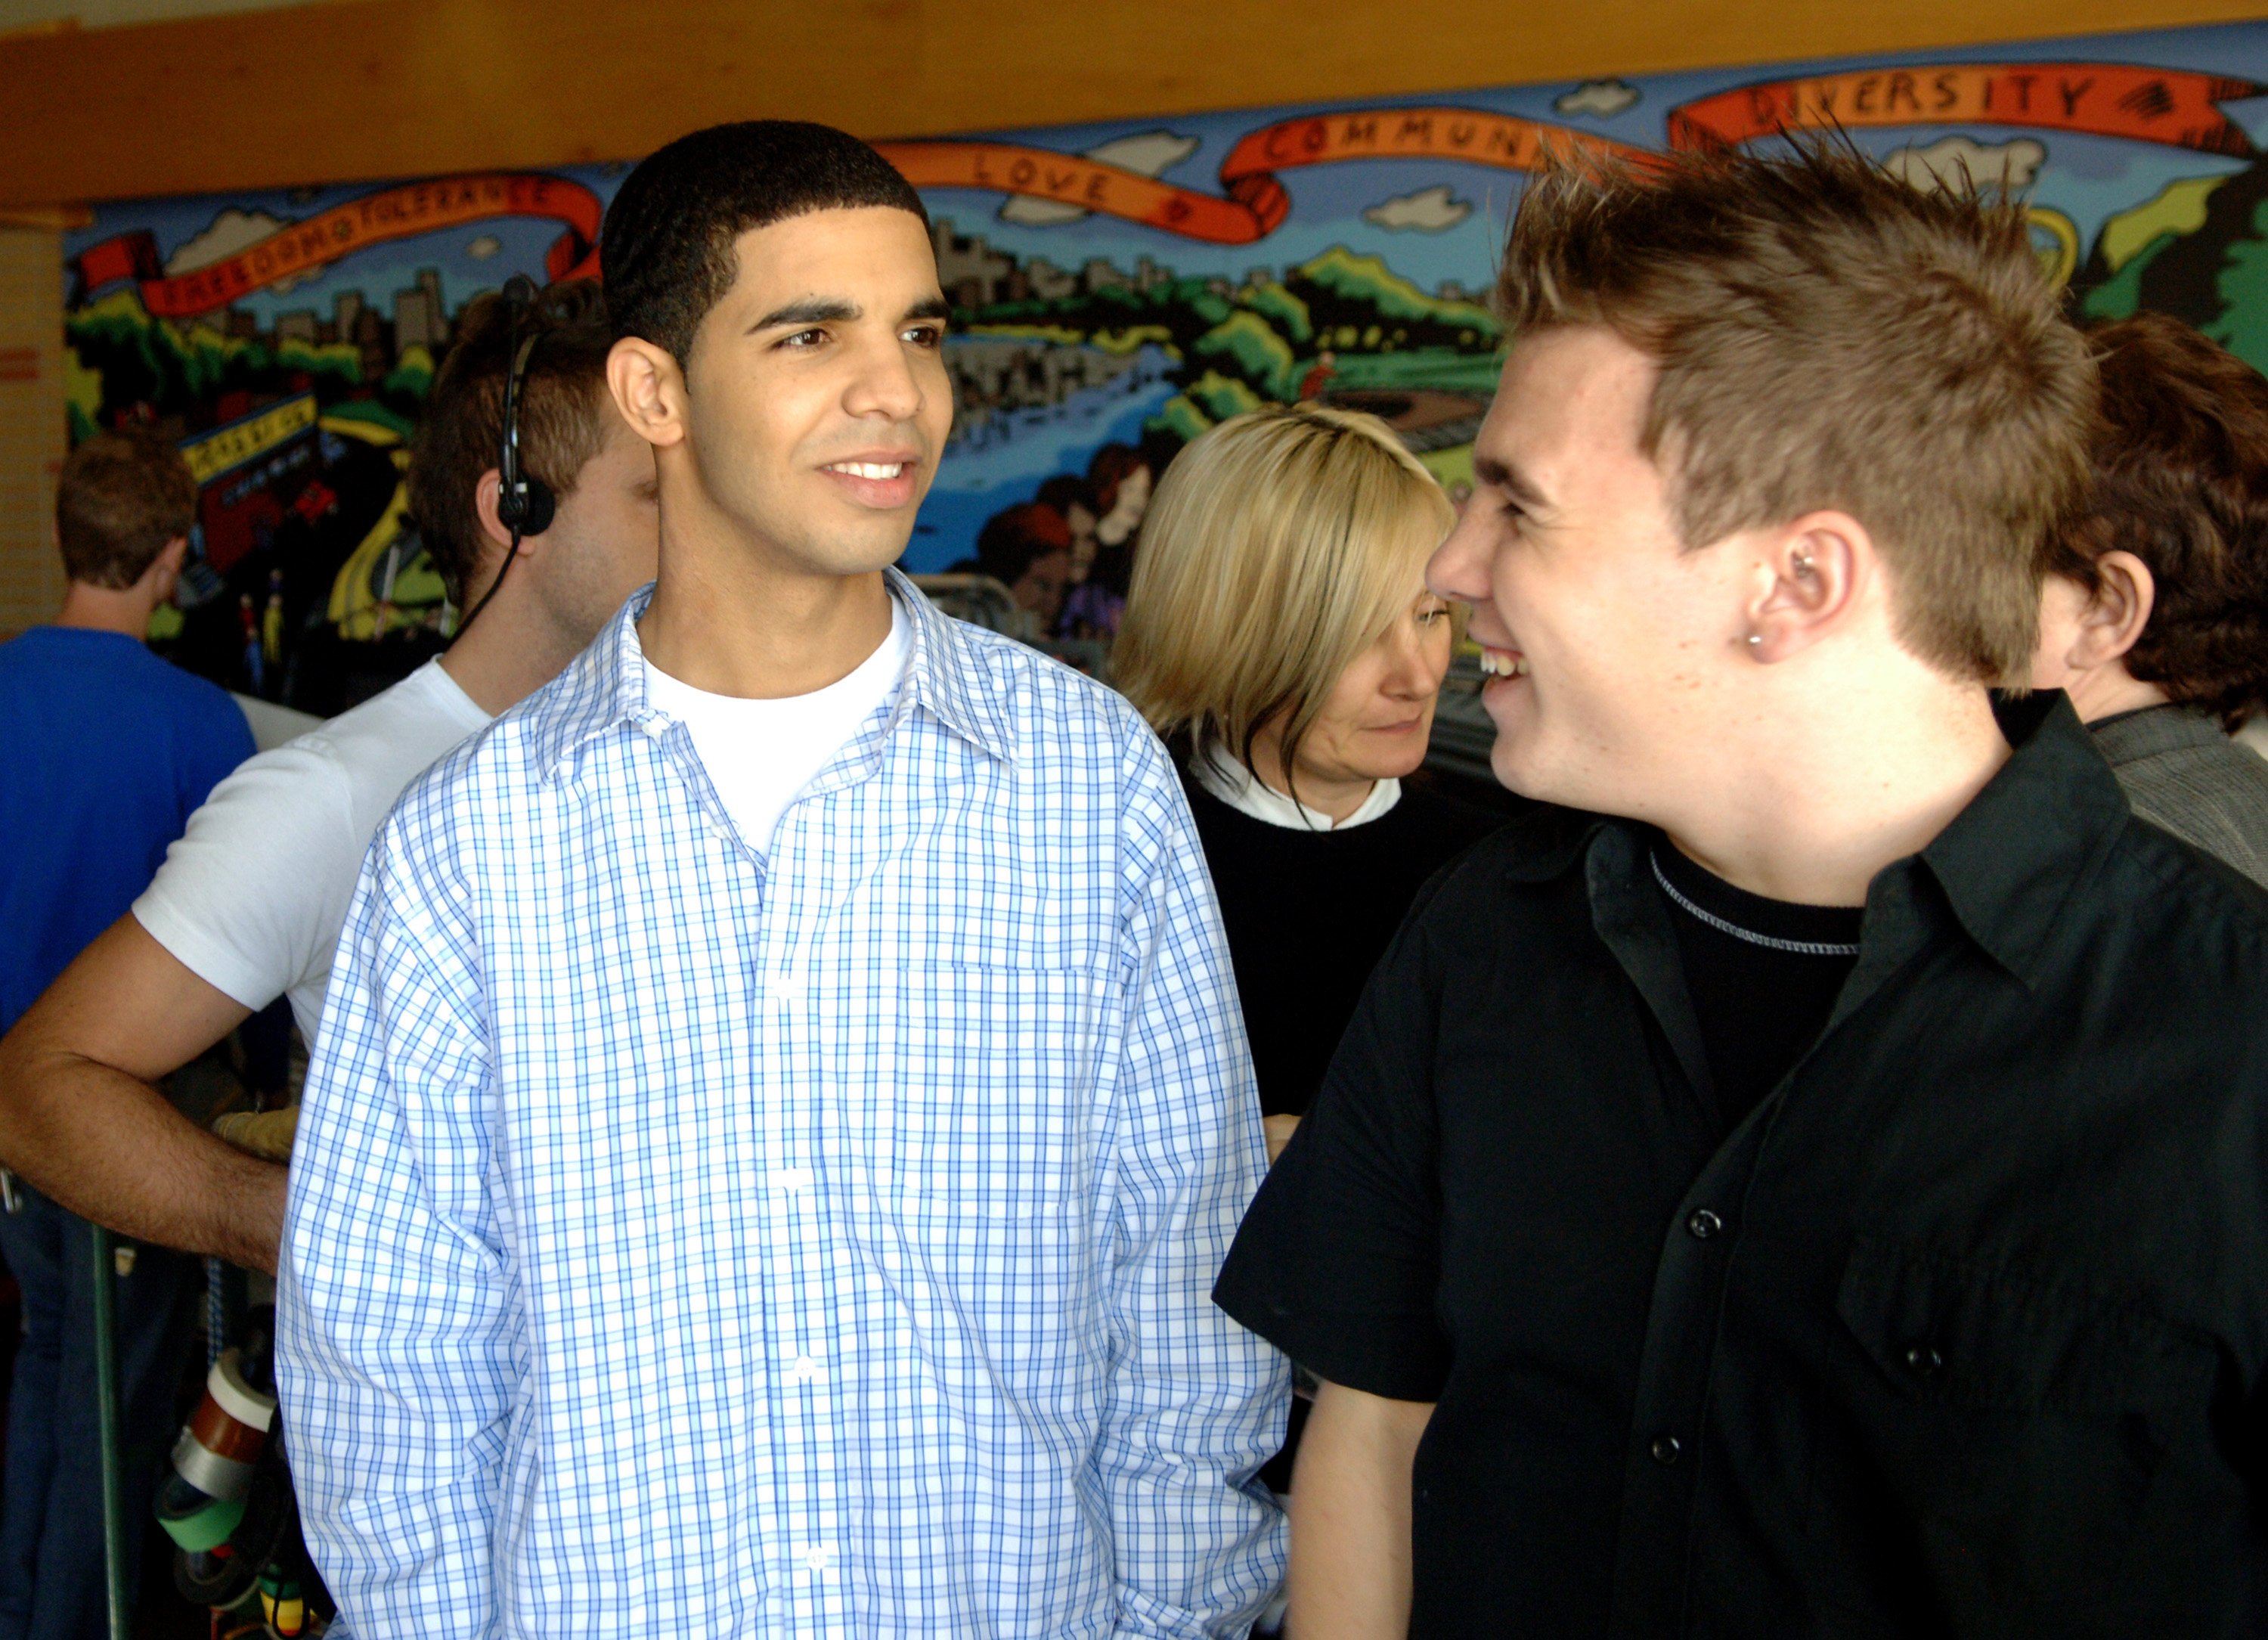 Aubrey Graham (Jimmy) and Shane Kippel (Spinner) during "Degrassi: The Next Generation" Celebrates 100th Episode at Degrassi High School Set in Toronto, Ontario, Canada